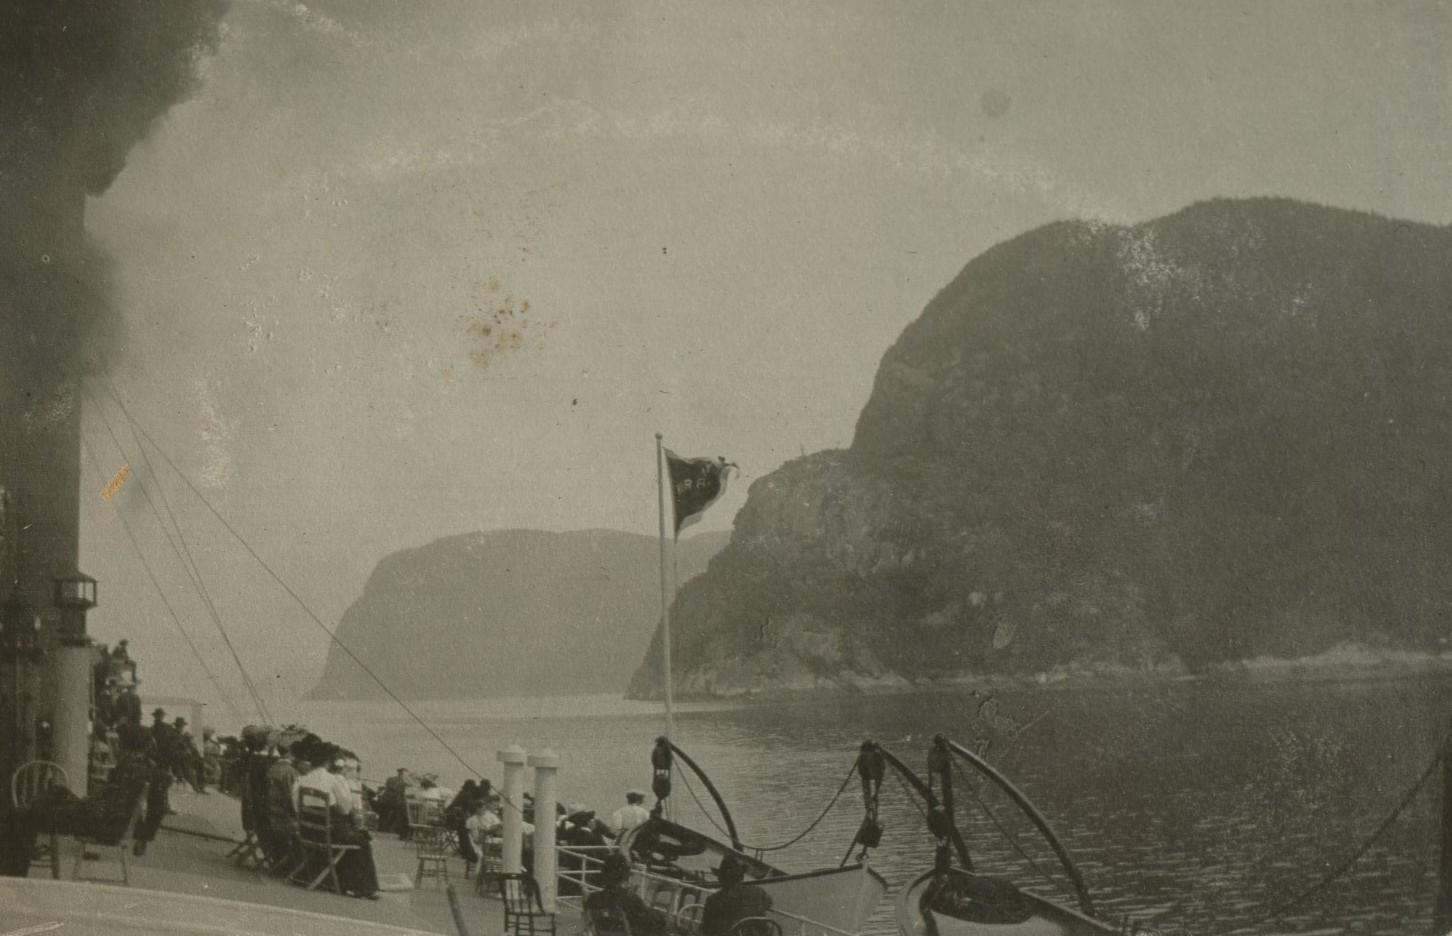 Passengers sitting on the bridge of a steamer, looking at the steep mountains on the shore.